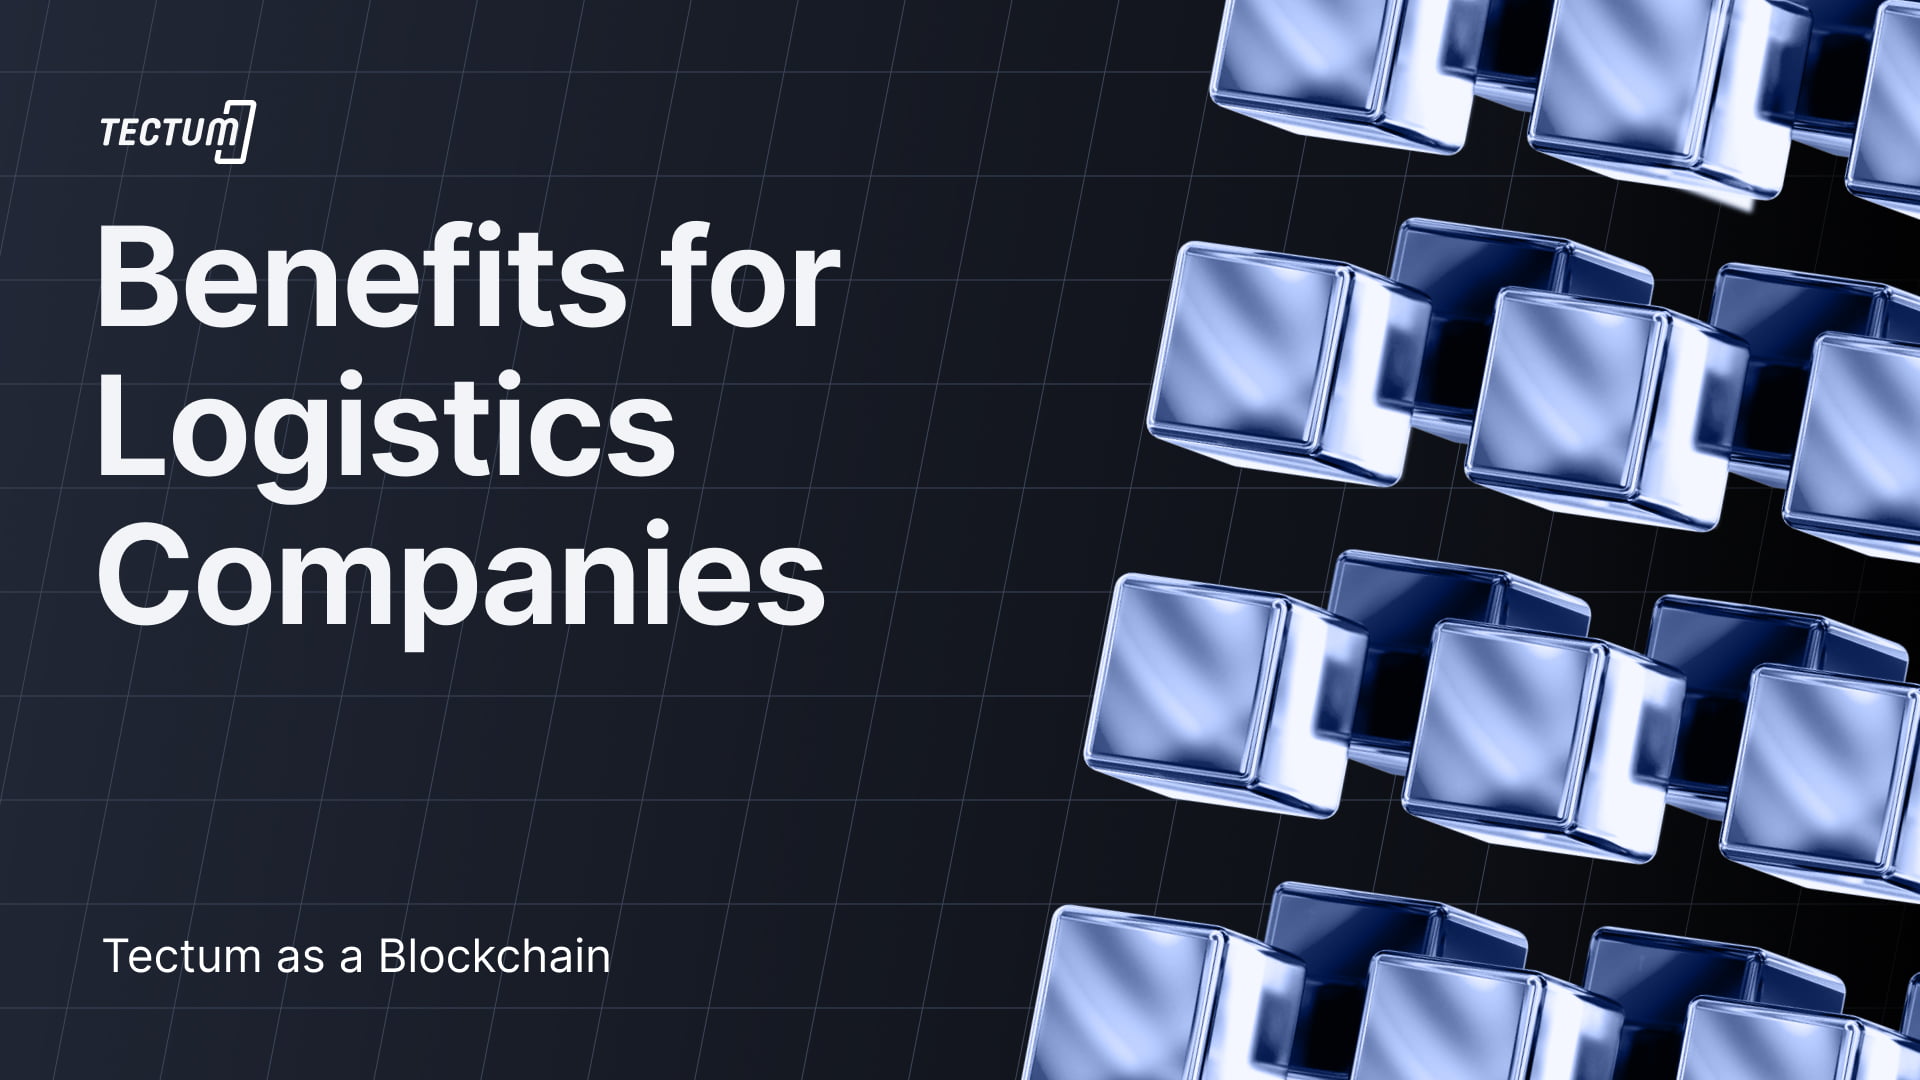 Tectum as a Blockchain – Benefits of this Innovation for Logistics Companies